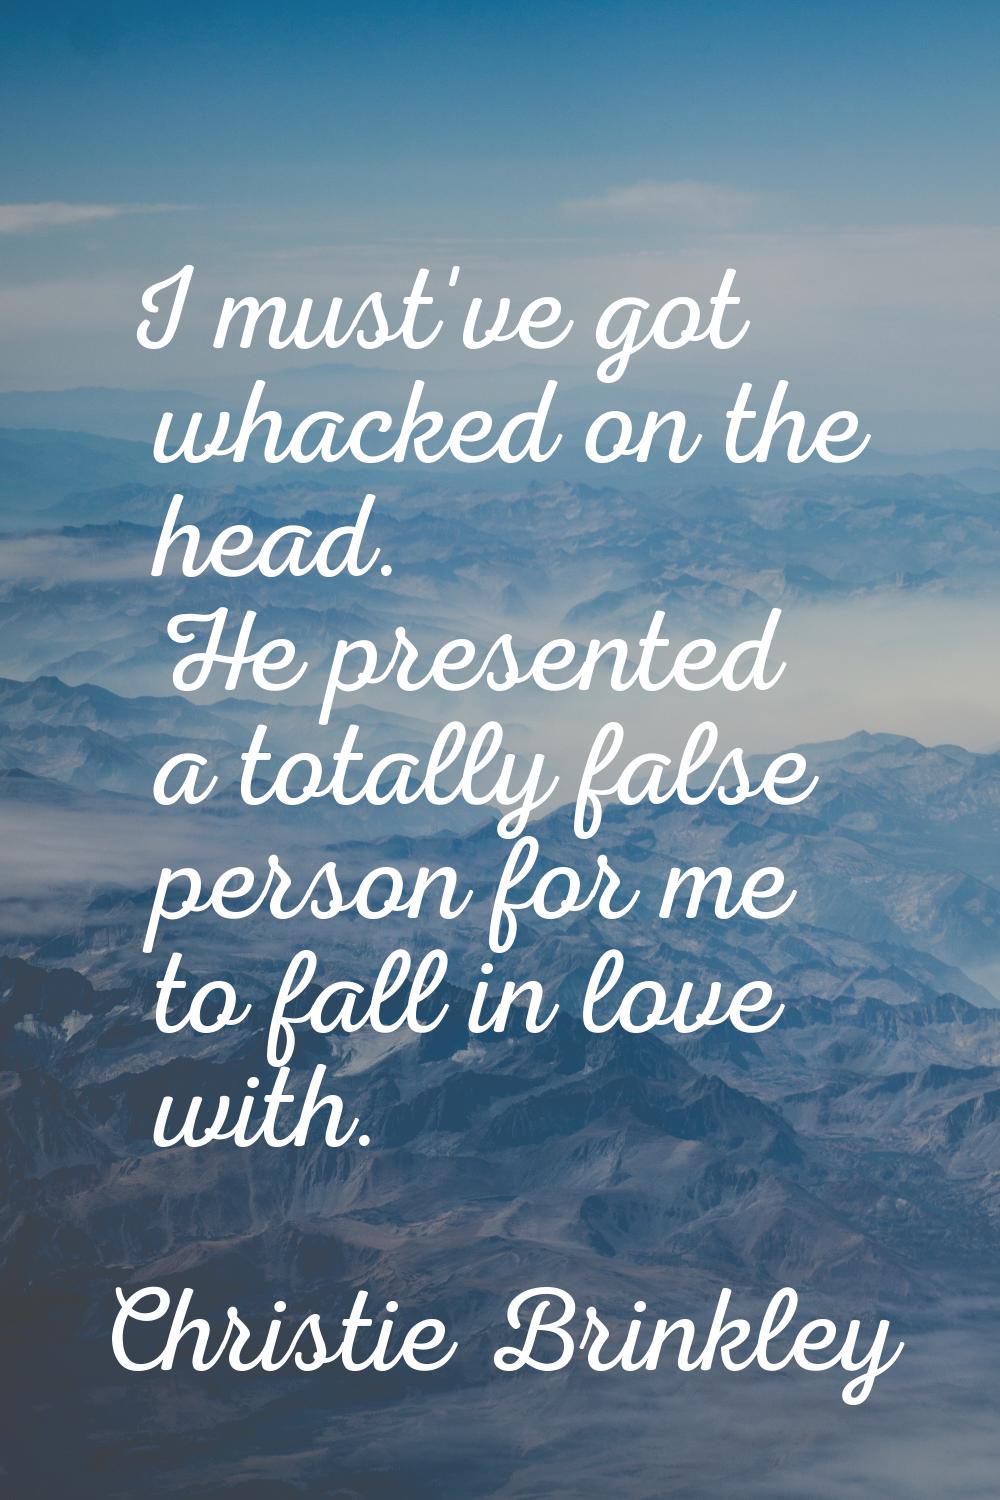 I must've got whacked on the head. He presented a totally false person for me to fall in love with.